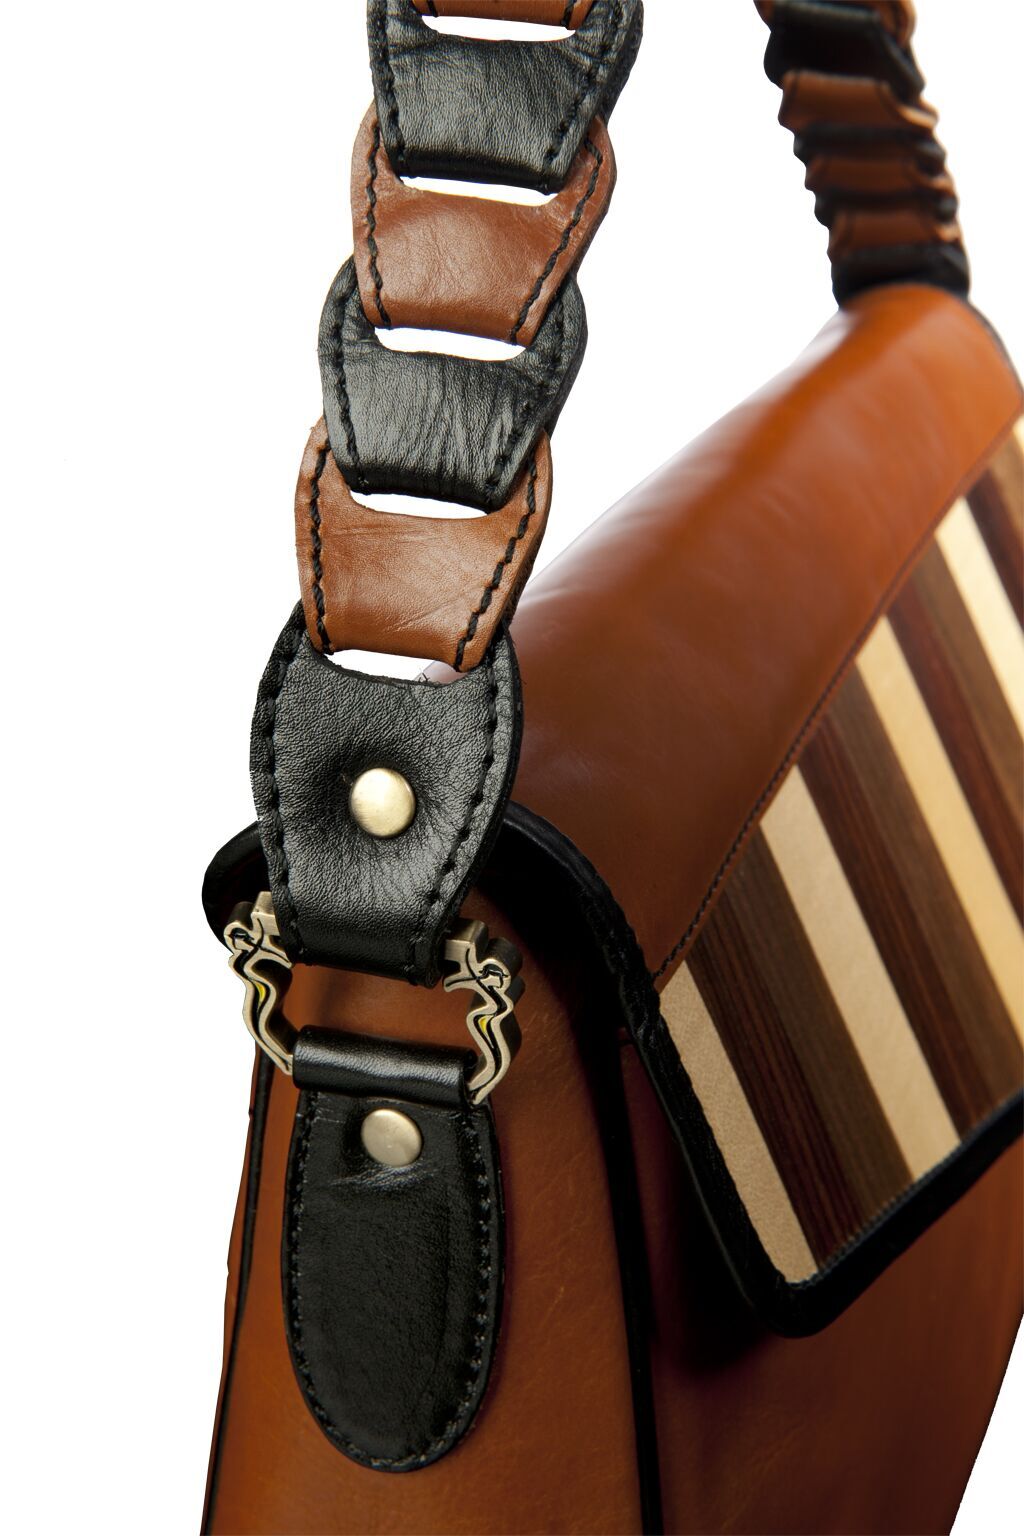 luxury leather bag Beethoven strap